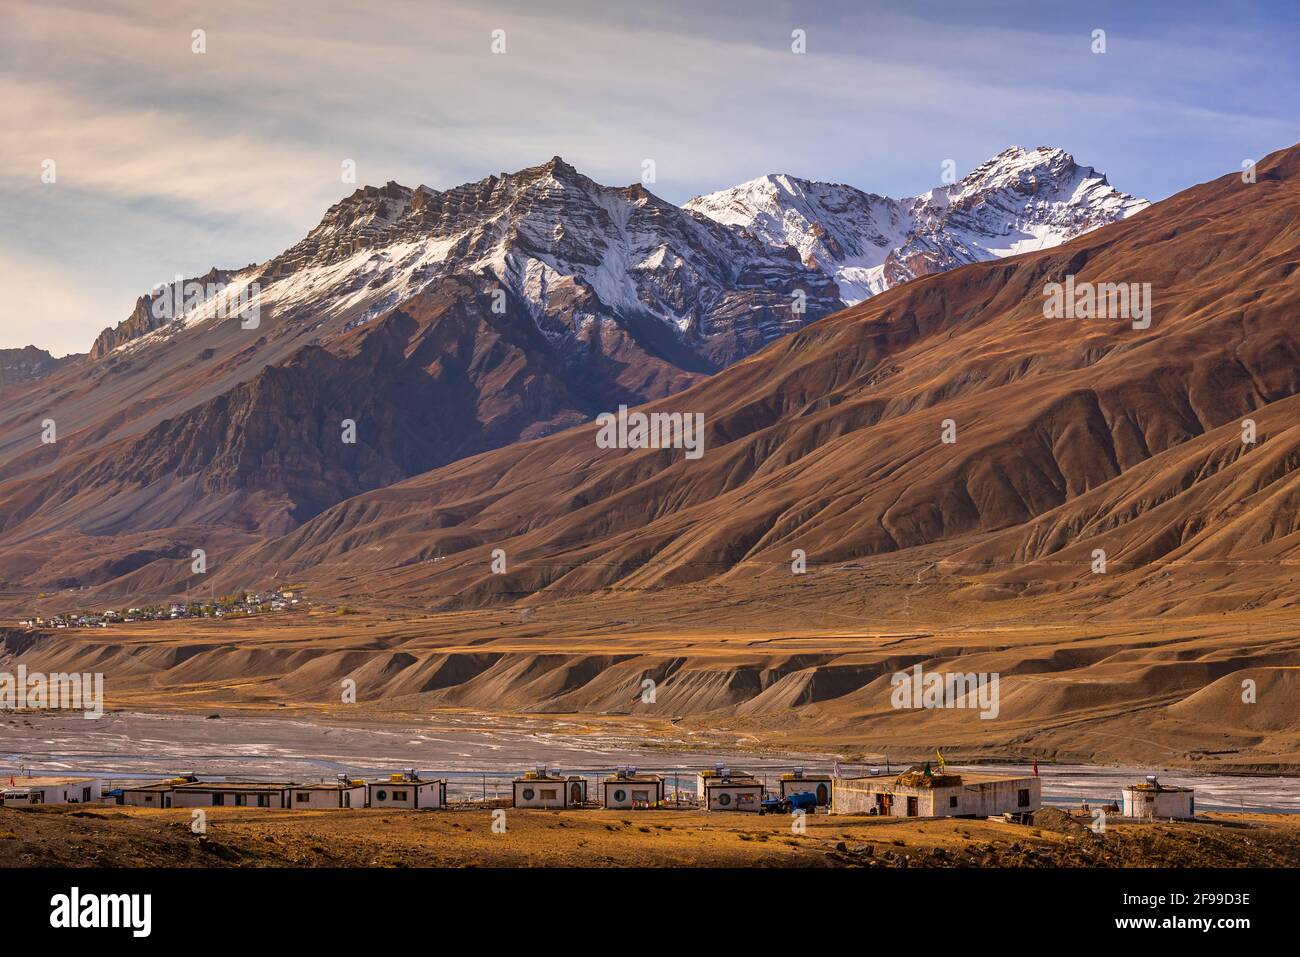 Panoramic landscape of Spiti river valley and snow capped mountains during sunrise near Kaza town in Lahaul and Spiti district of Himachal Pradesh, In Stock Photo